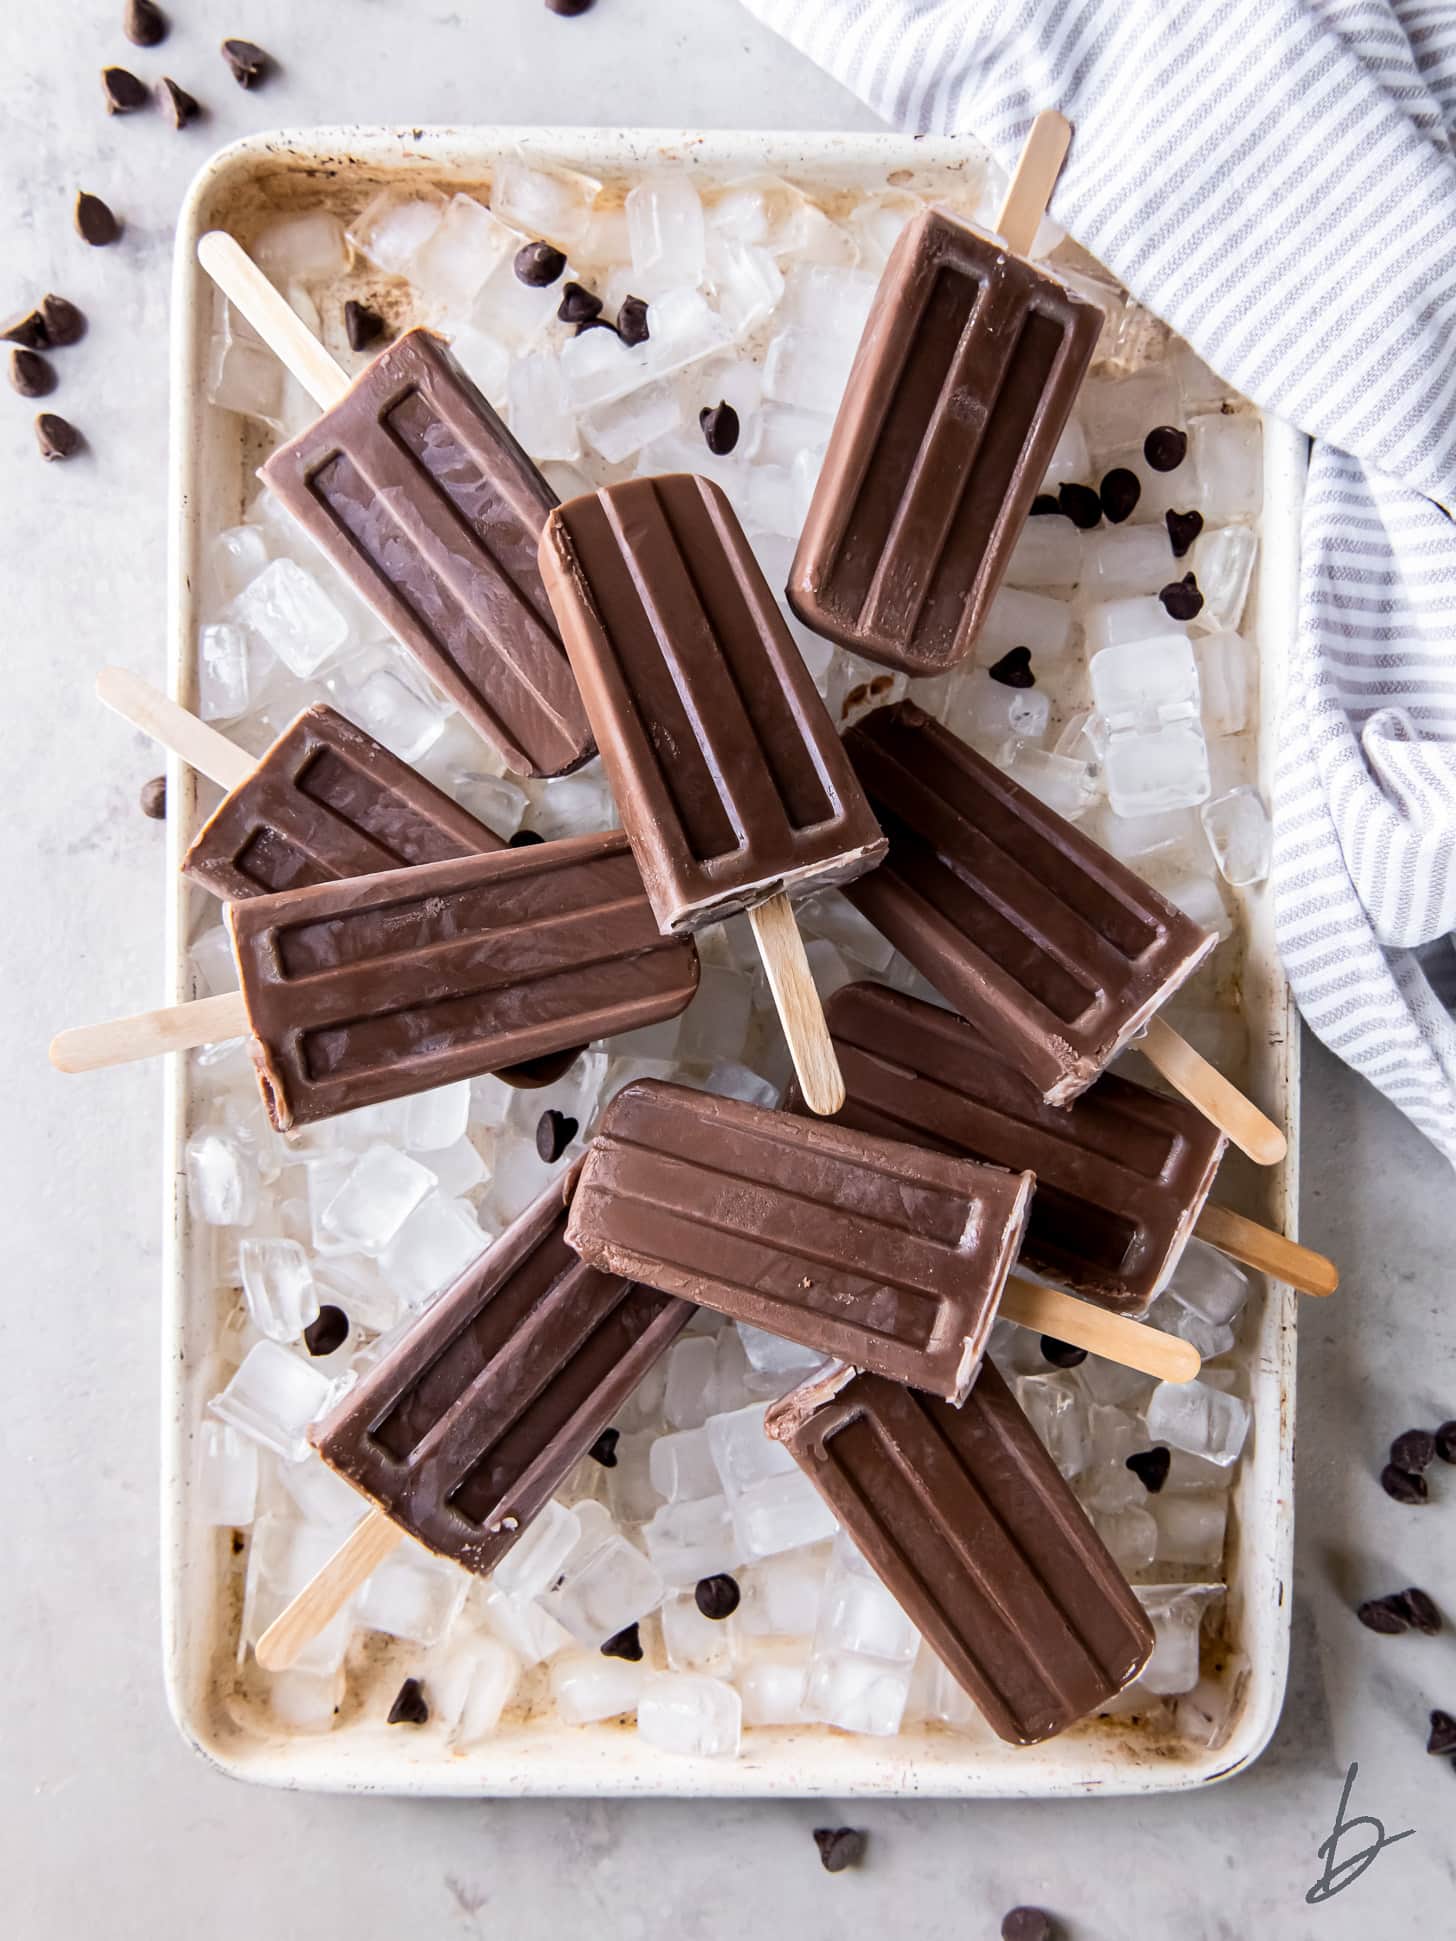 fudgesicles on a baking sheet with ice cubes.